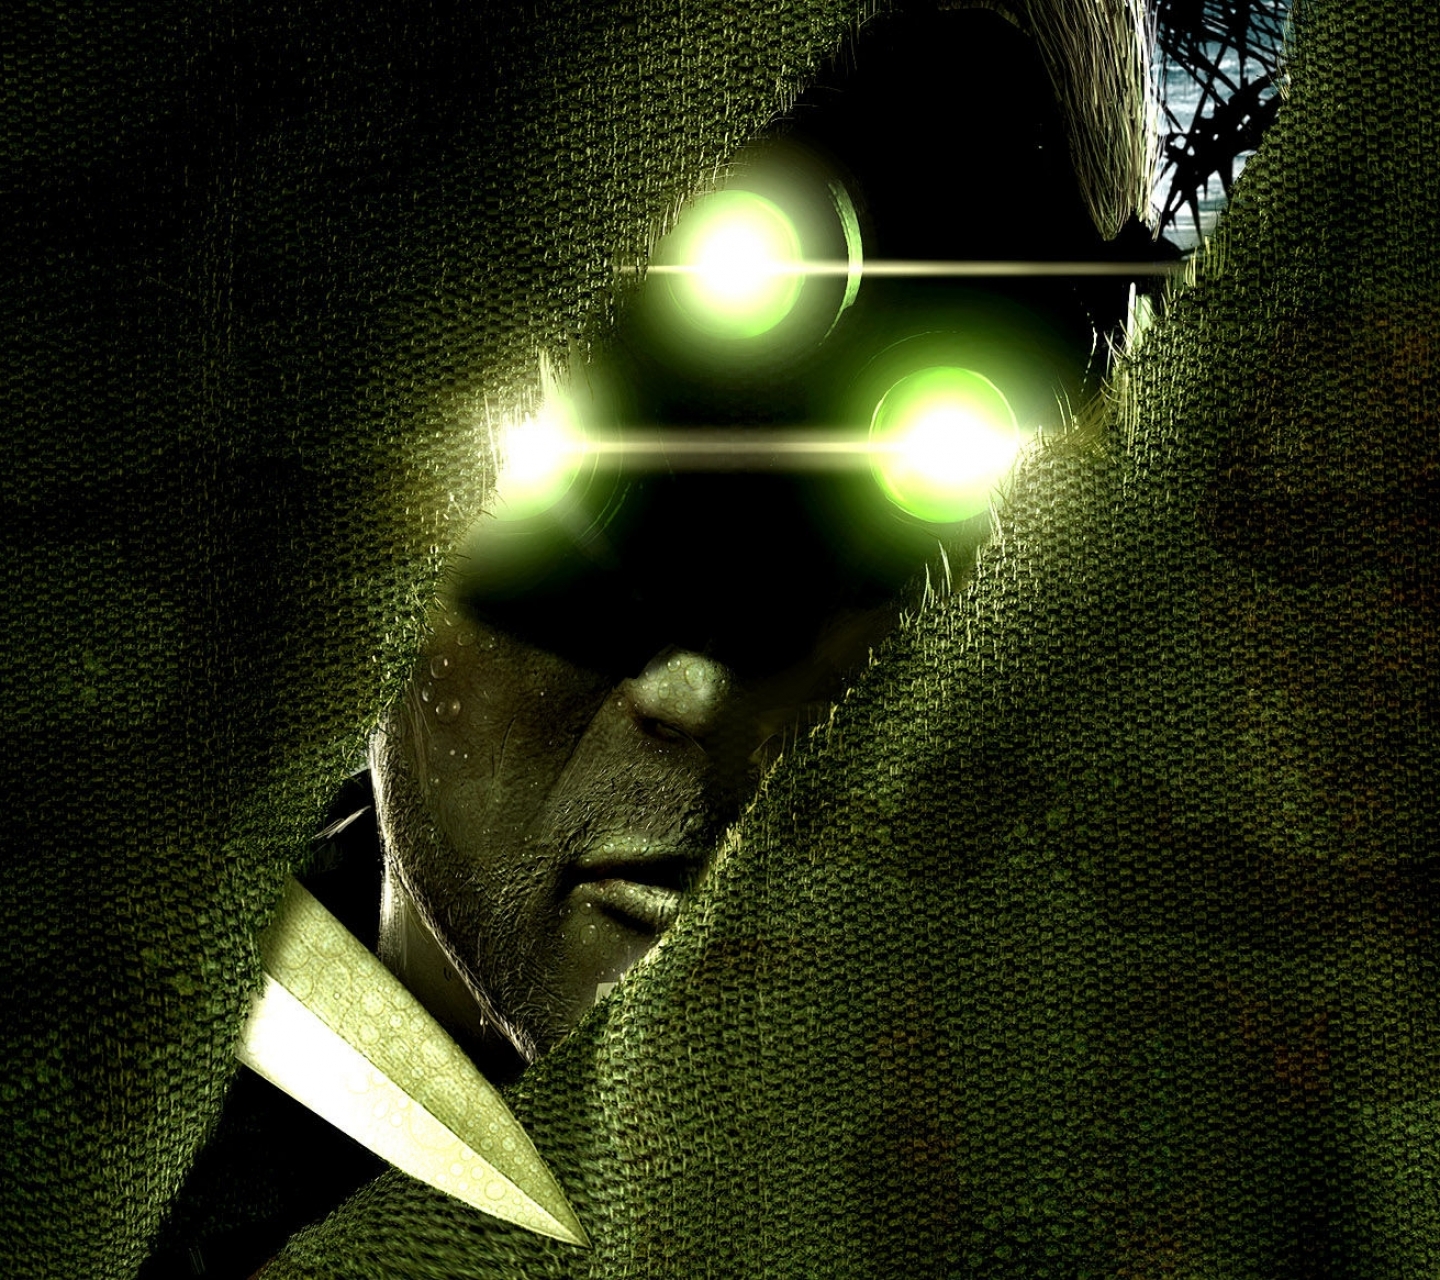 video game, tom clancy's splinter cell: chaos theory, tom clancy's